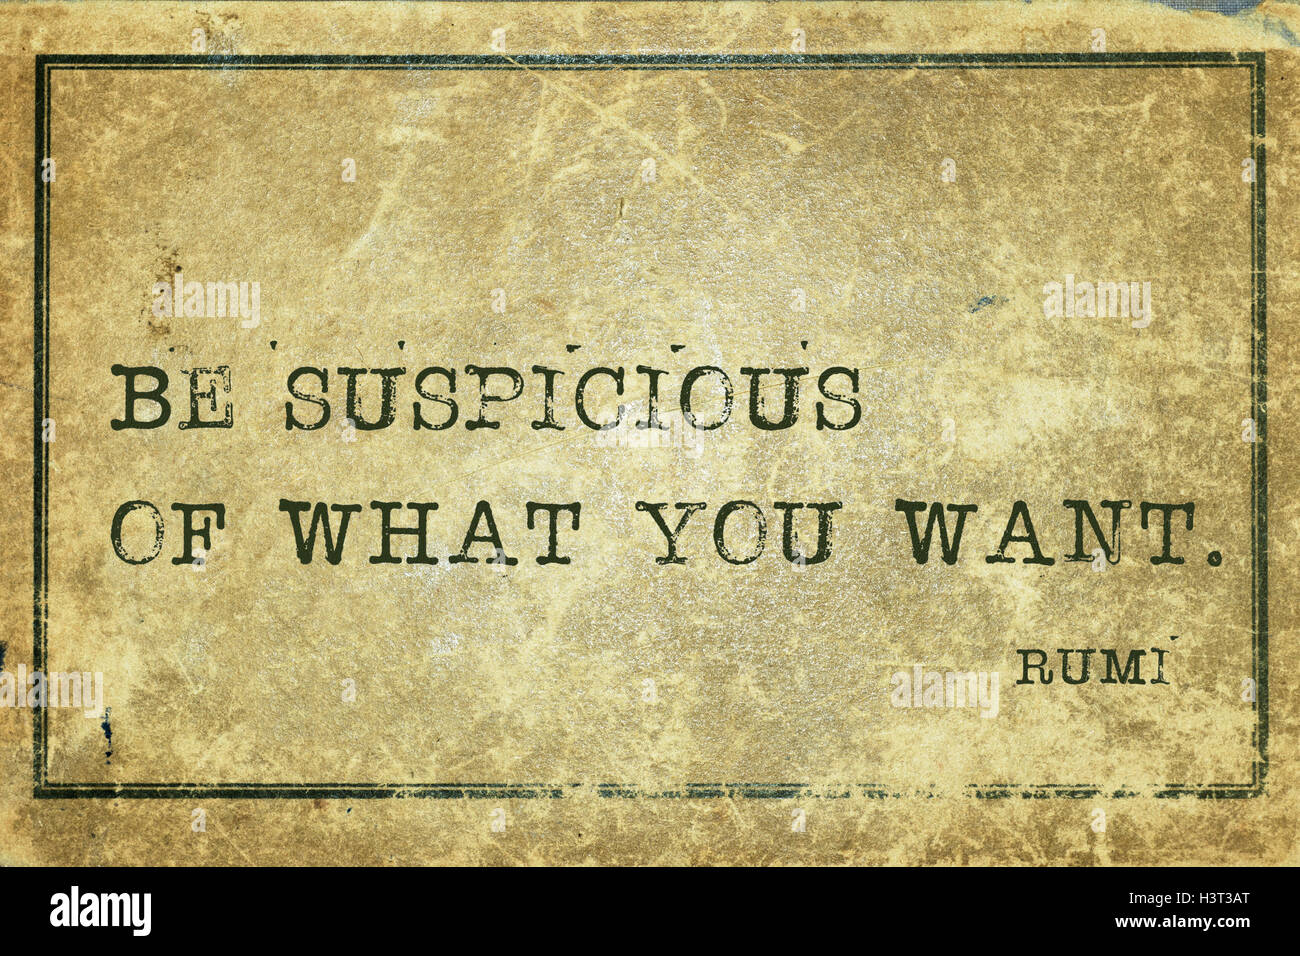 Be suspicious of what you want - ancient Persian poet and philosopher Rumi quote printed on grunge vintage cardboard Stock Photo